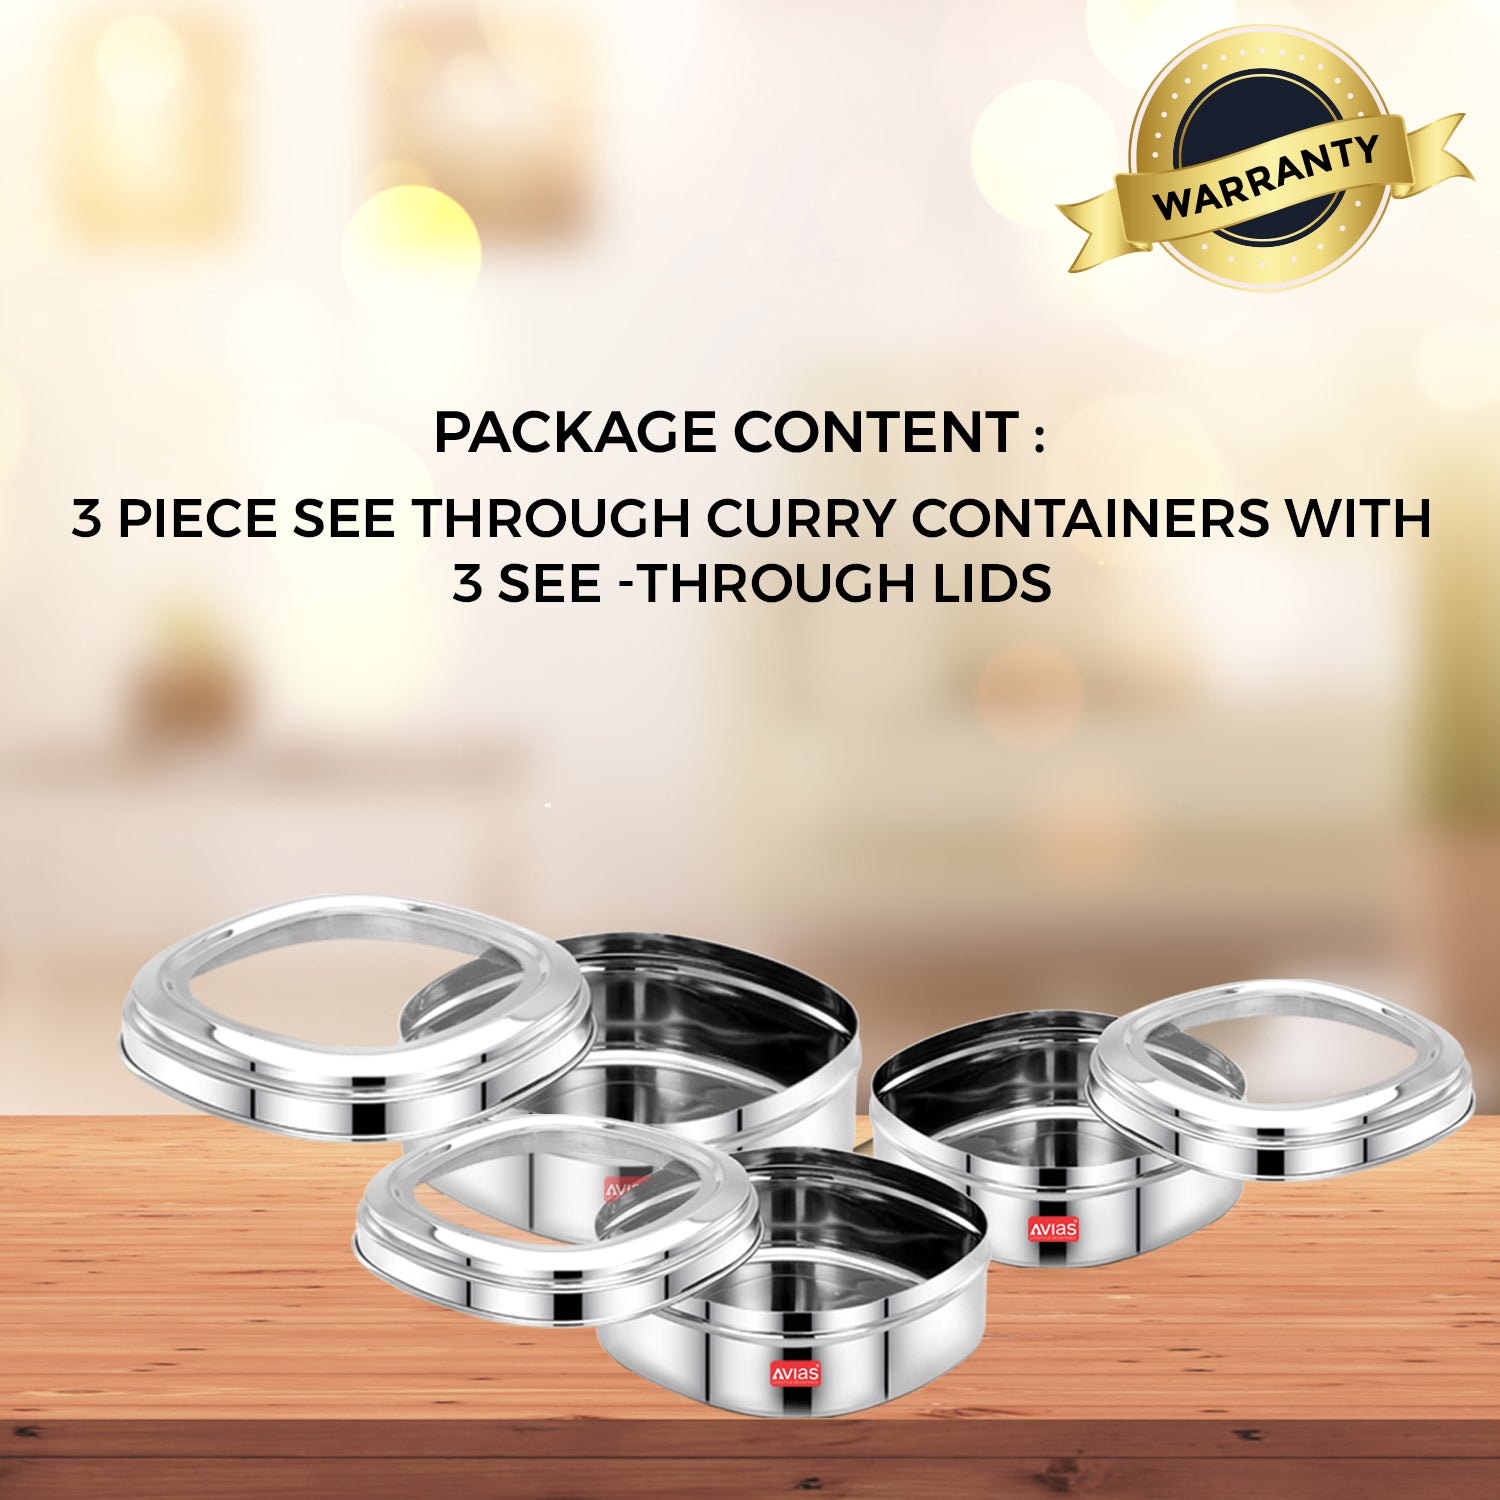 Curry/Chocolate box see-through lid set of 3